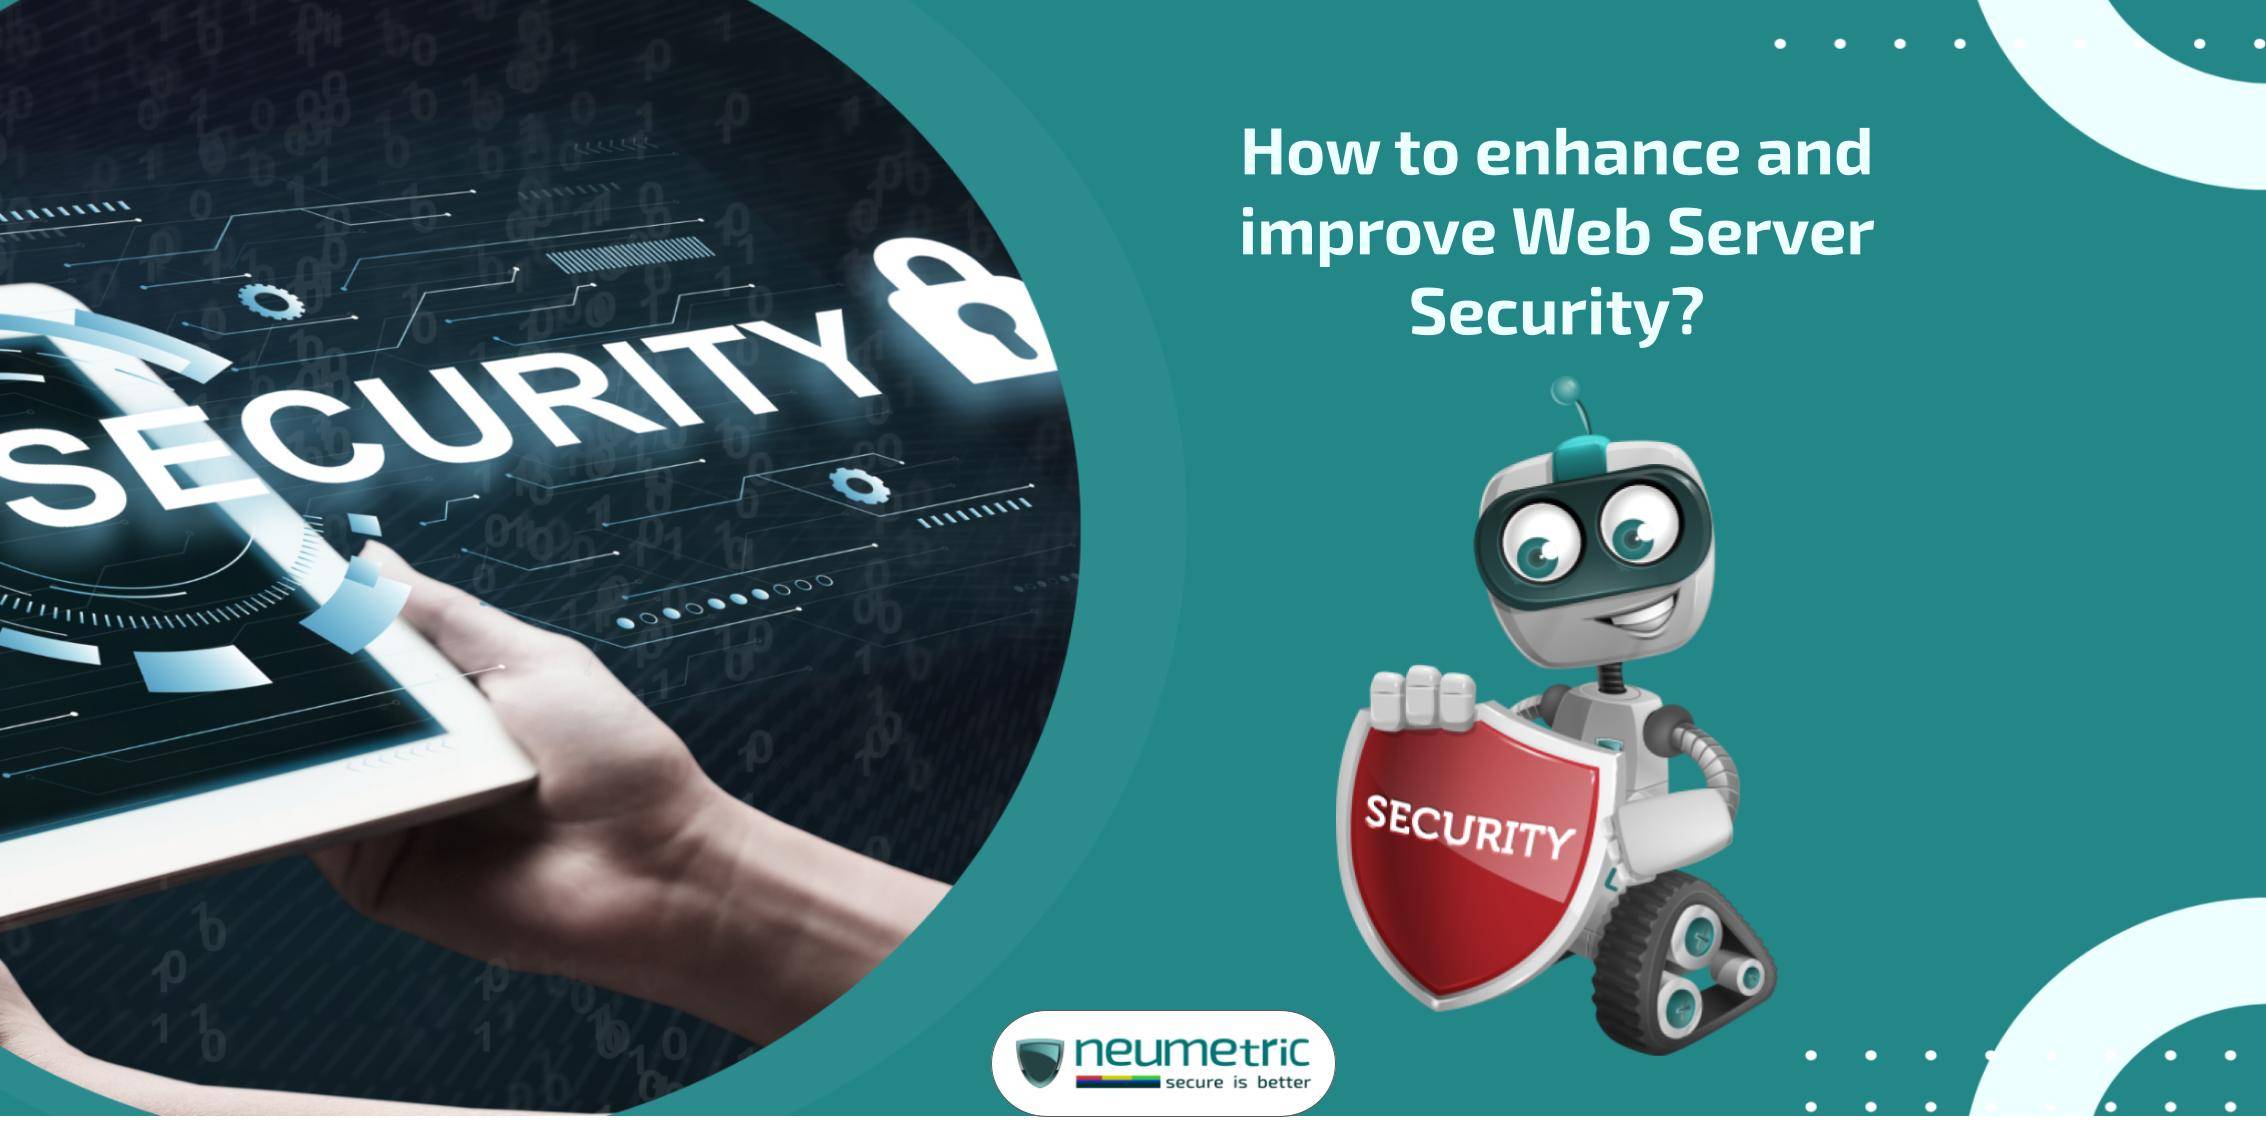 How to enhance and improve Web Server Security?